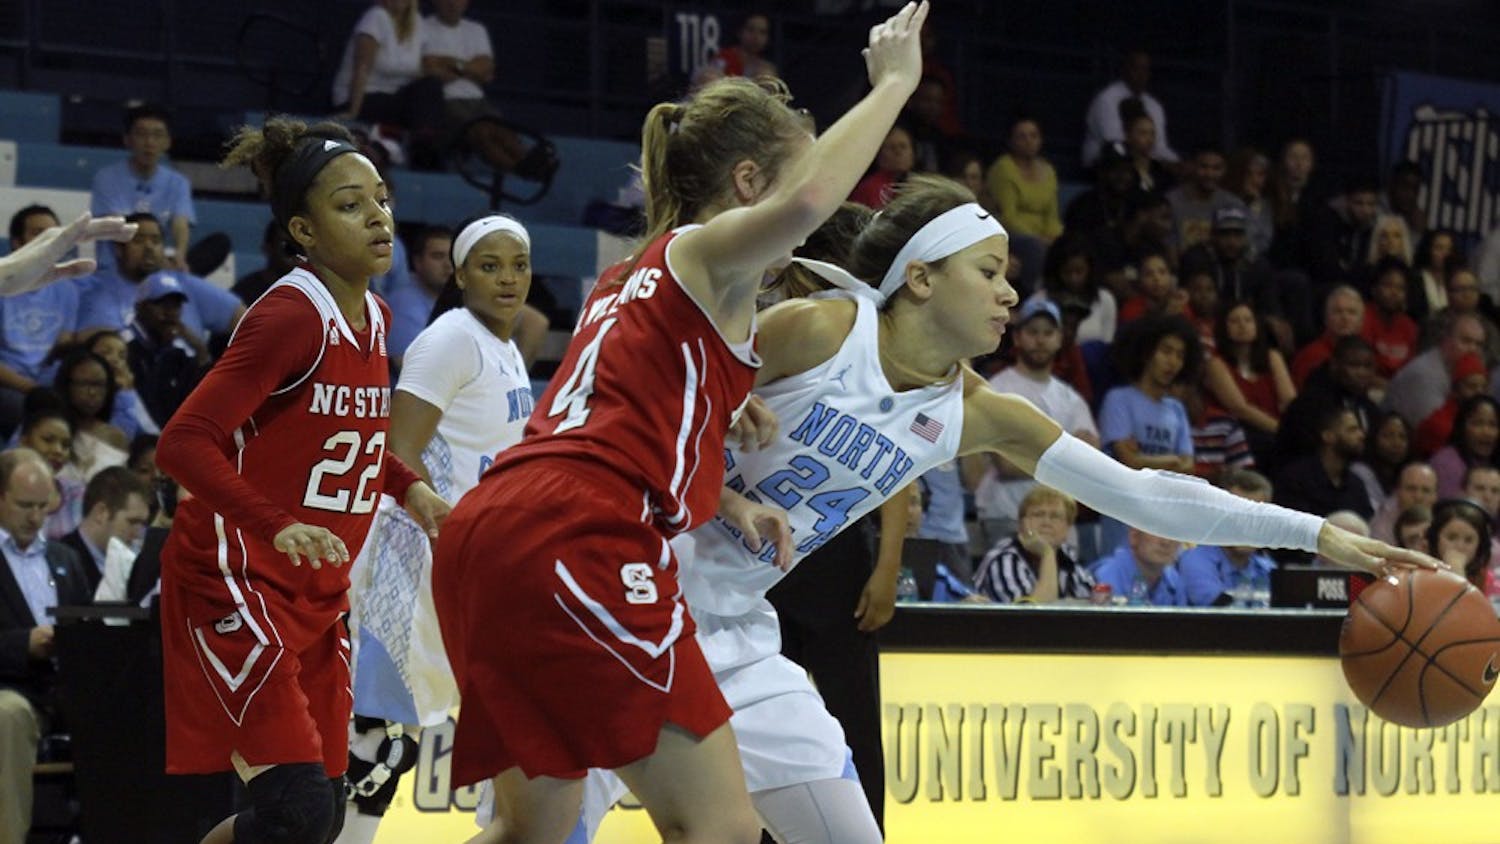 The UNC women's basketball team defeated NC State 72 to 56 Sunday in Carmichael Arena.